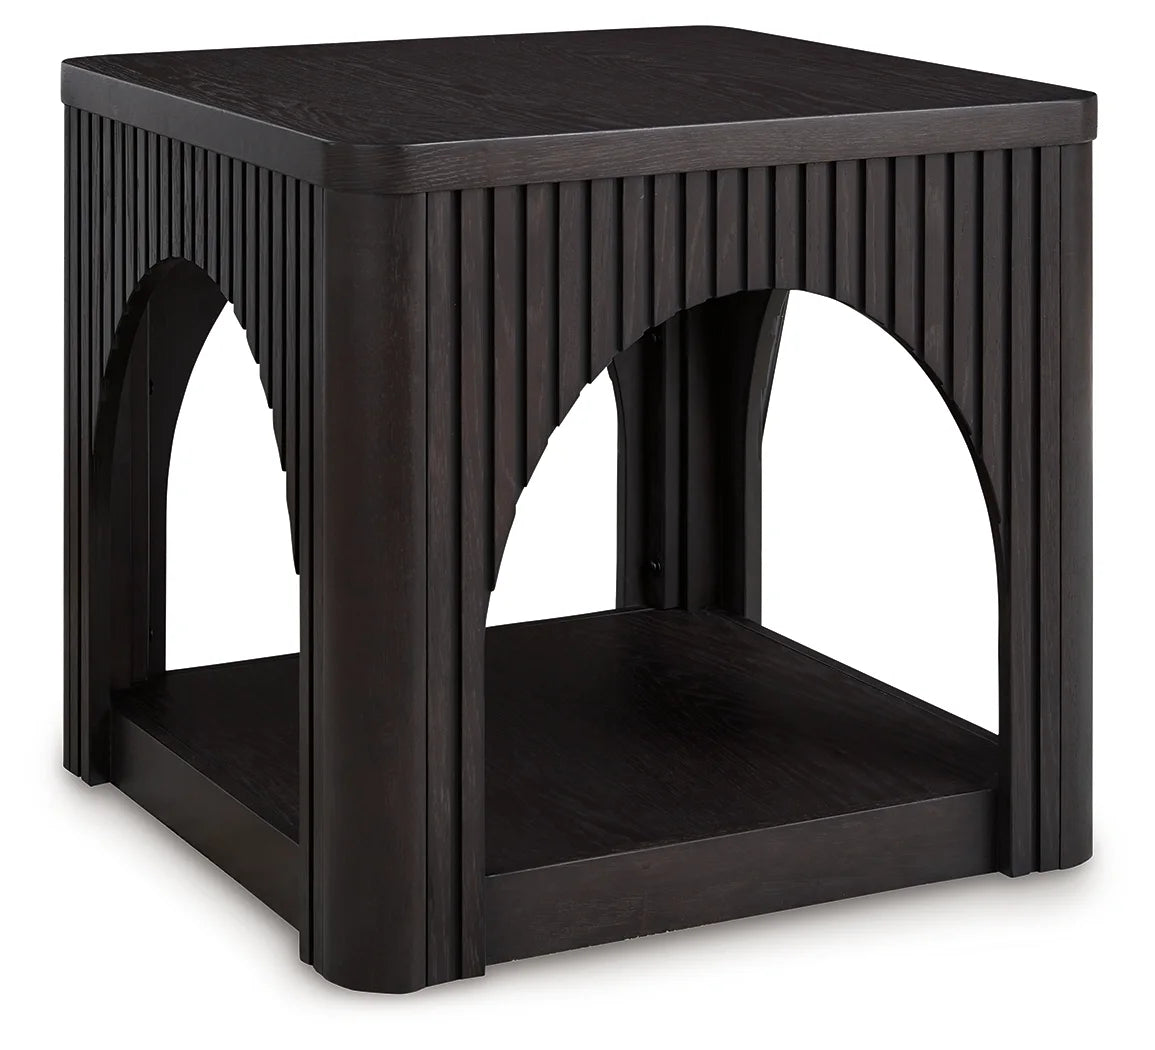 Yellink - Black - Square End Table 1